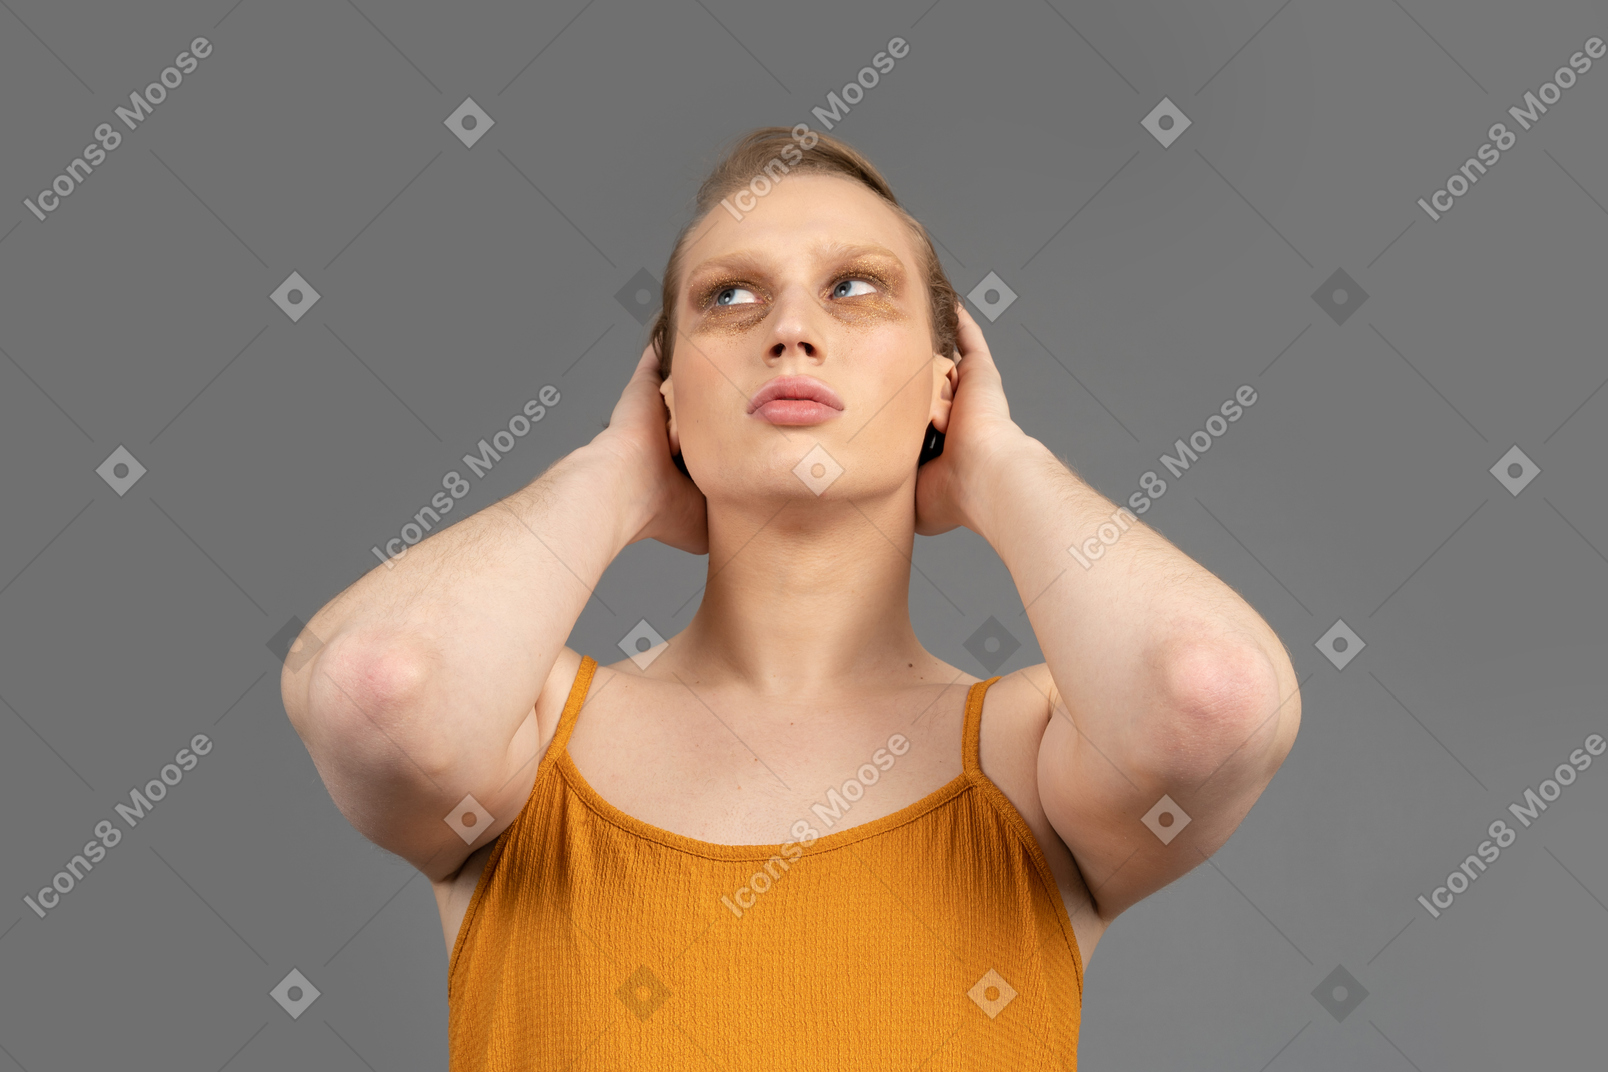 Close-up of a transgender person holding back of their head